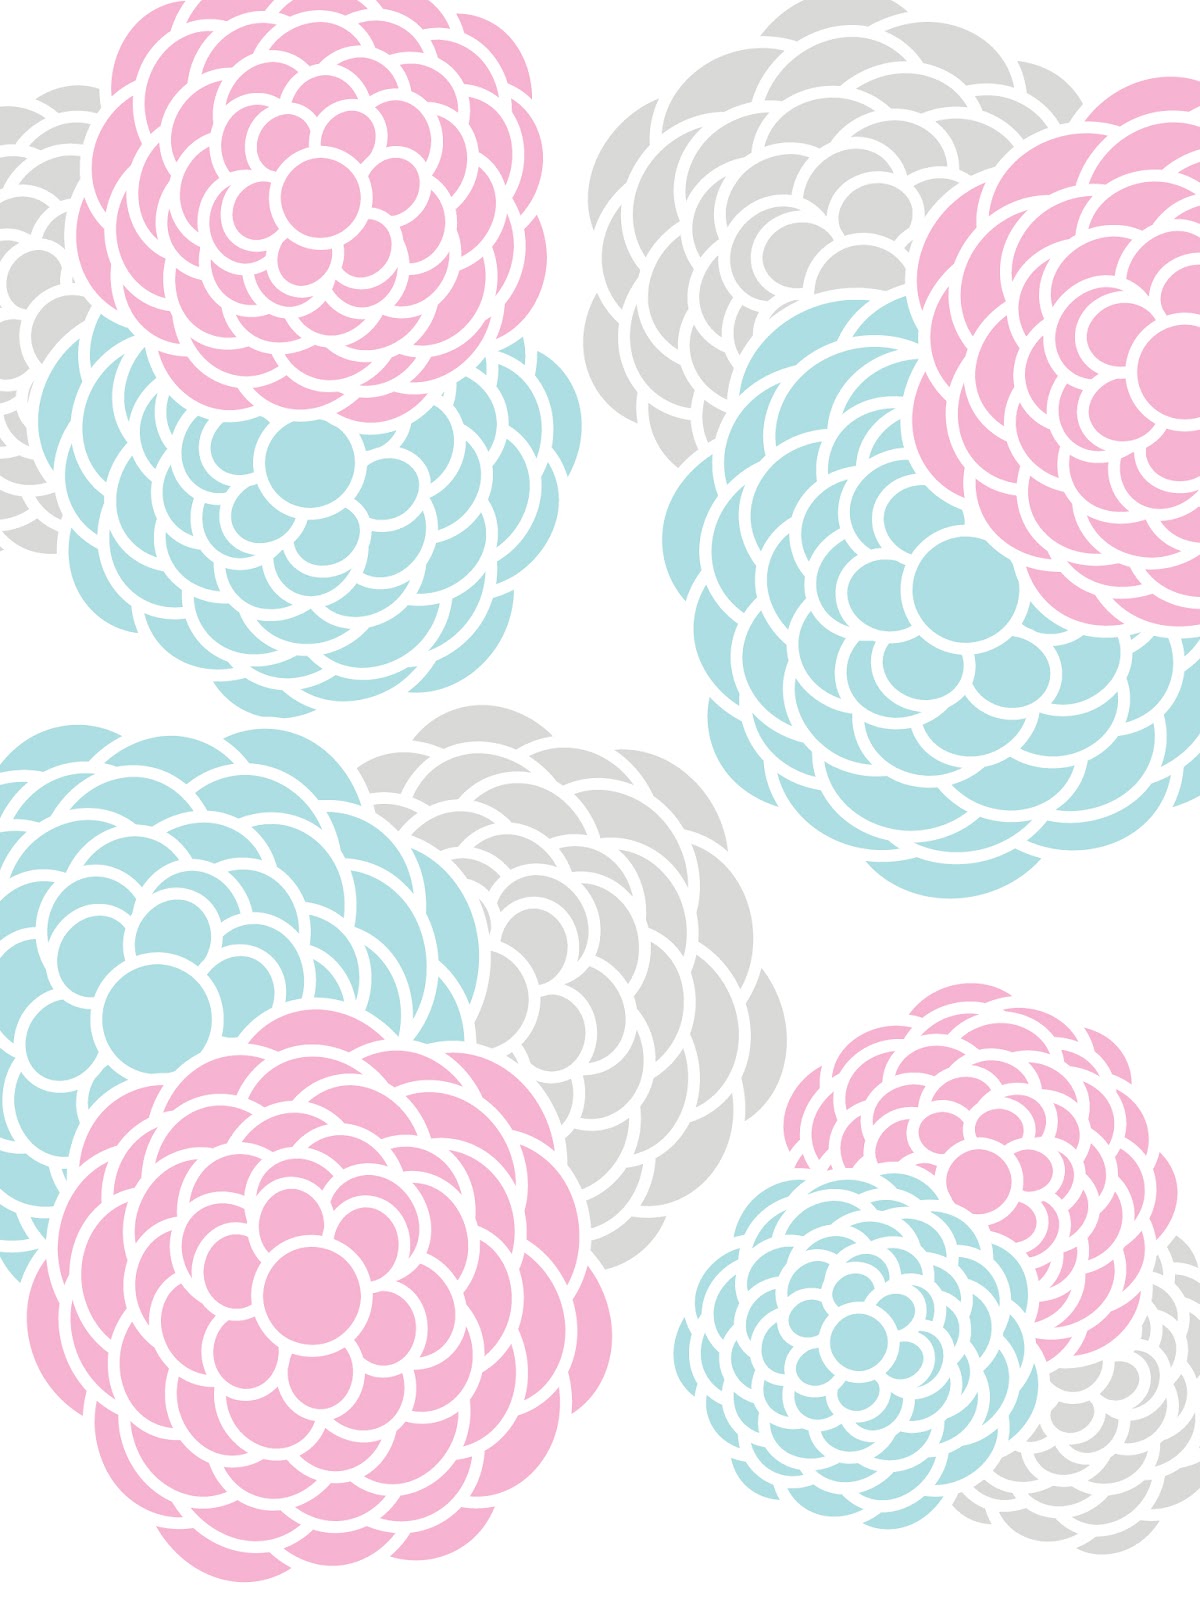 Make it Create Printables Backgrounds Wallpapers August 2012